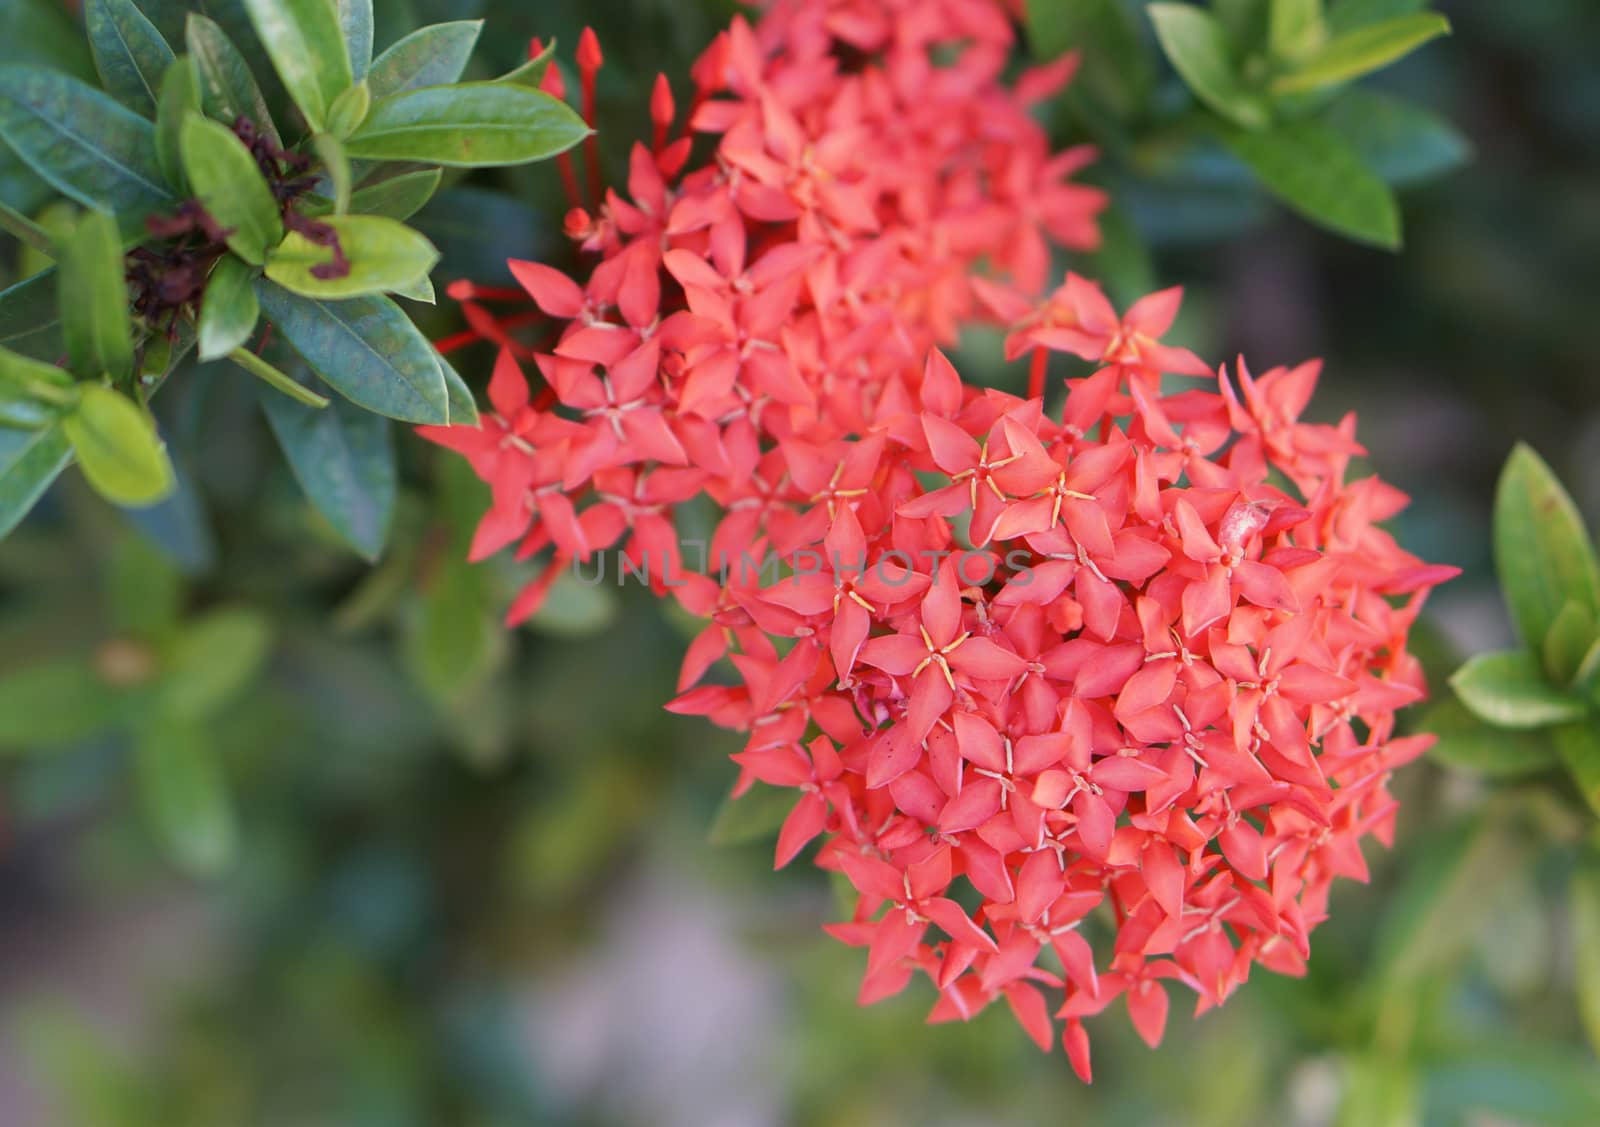 Red flower spike is blooming on tree in the morning.